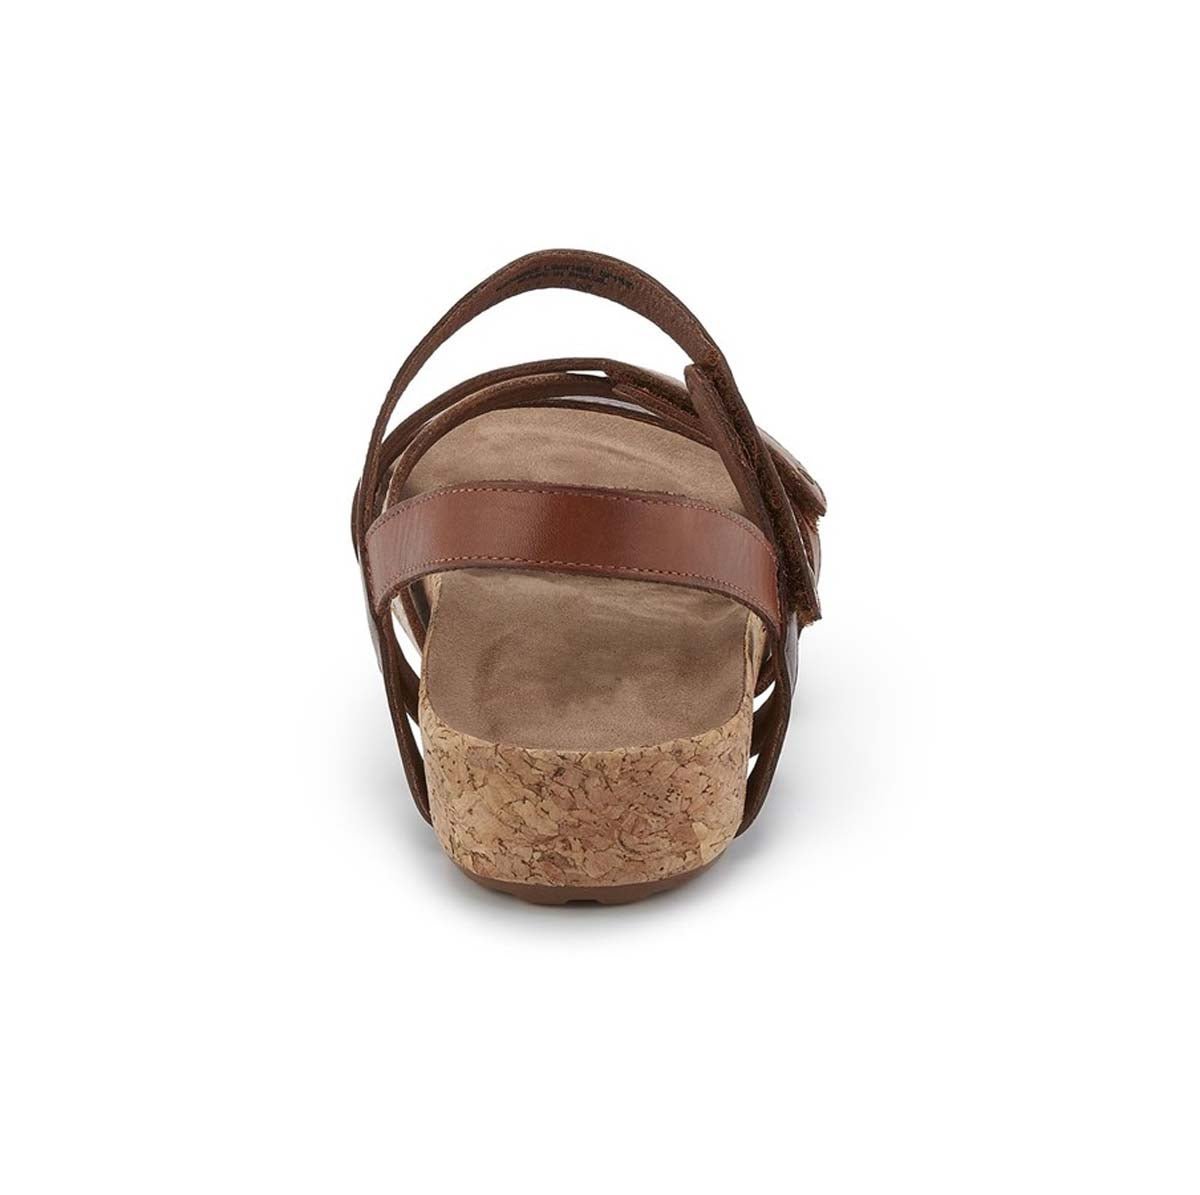 ROS HOMMERSON POOL WOMEN'S ADJUSTABLE STRAPS SANDAL IN BROWN - TLW Shoes